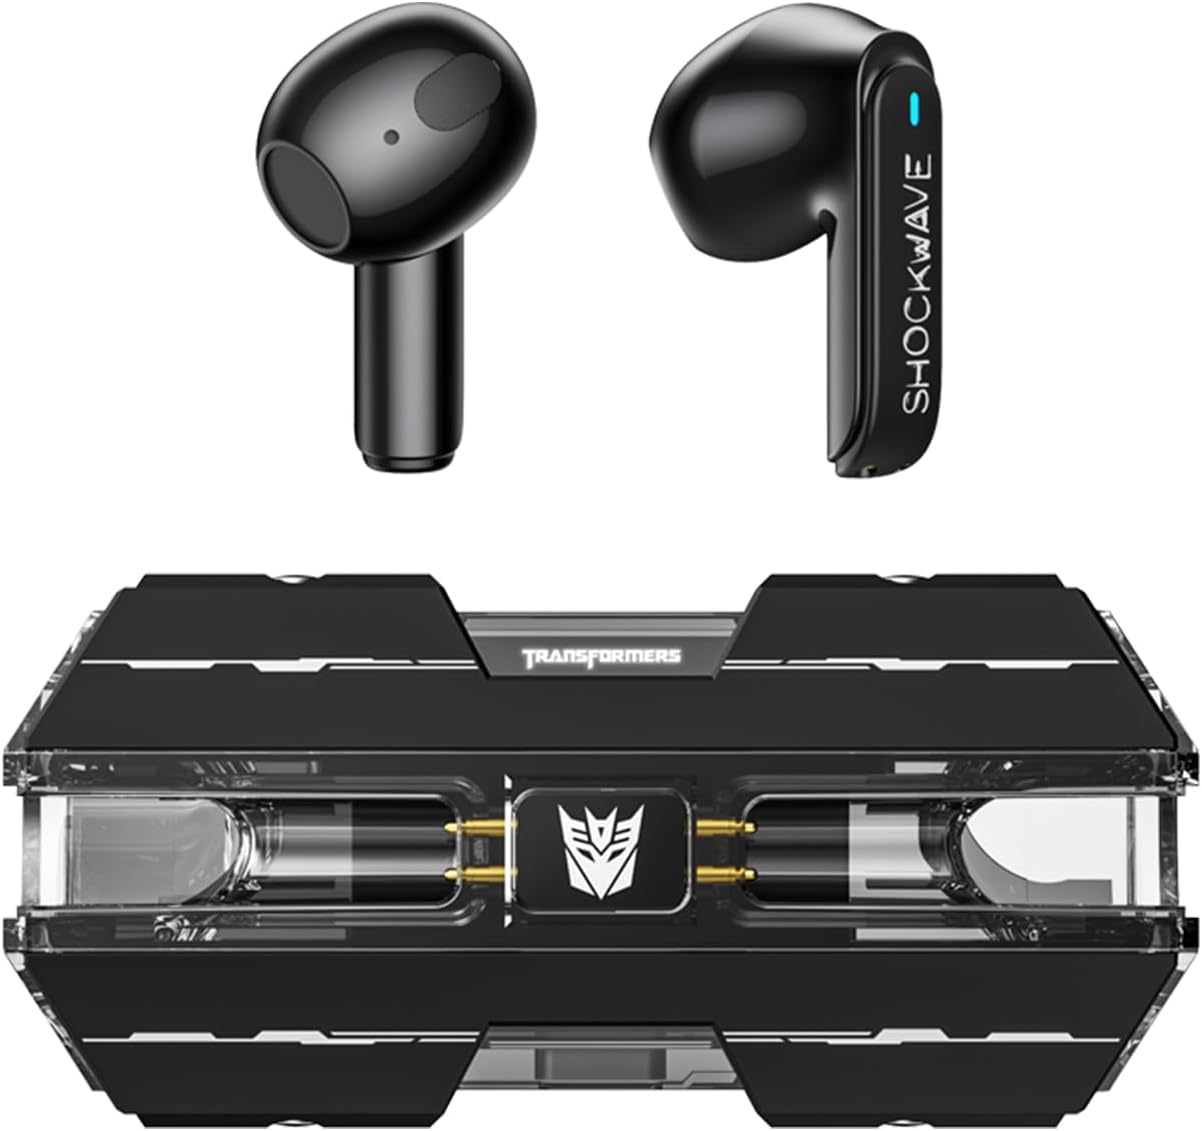 Transformers TF-T01 True Wireless Earbuds Bluetooth 5.4 Headphones Bass Stereo Earphones, Bluetooth Earbud in Ear Noise Cancelling Mic, 60H Playtime Ear Buds, IPX5 Waterproof Earphones for Android iOS